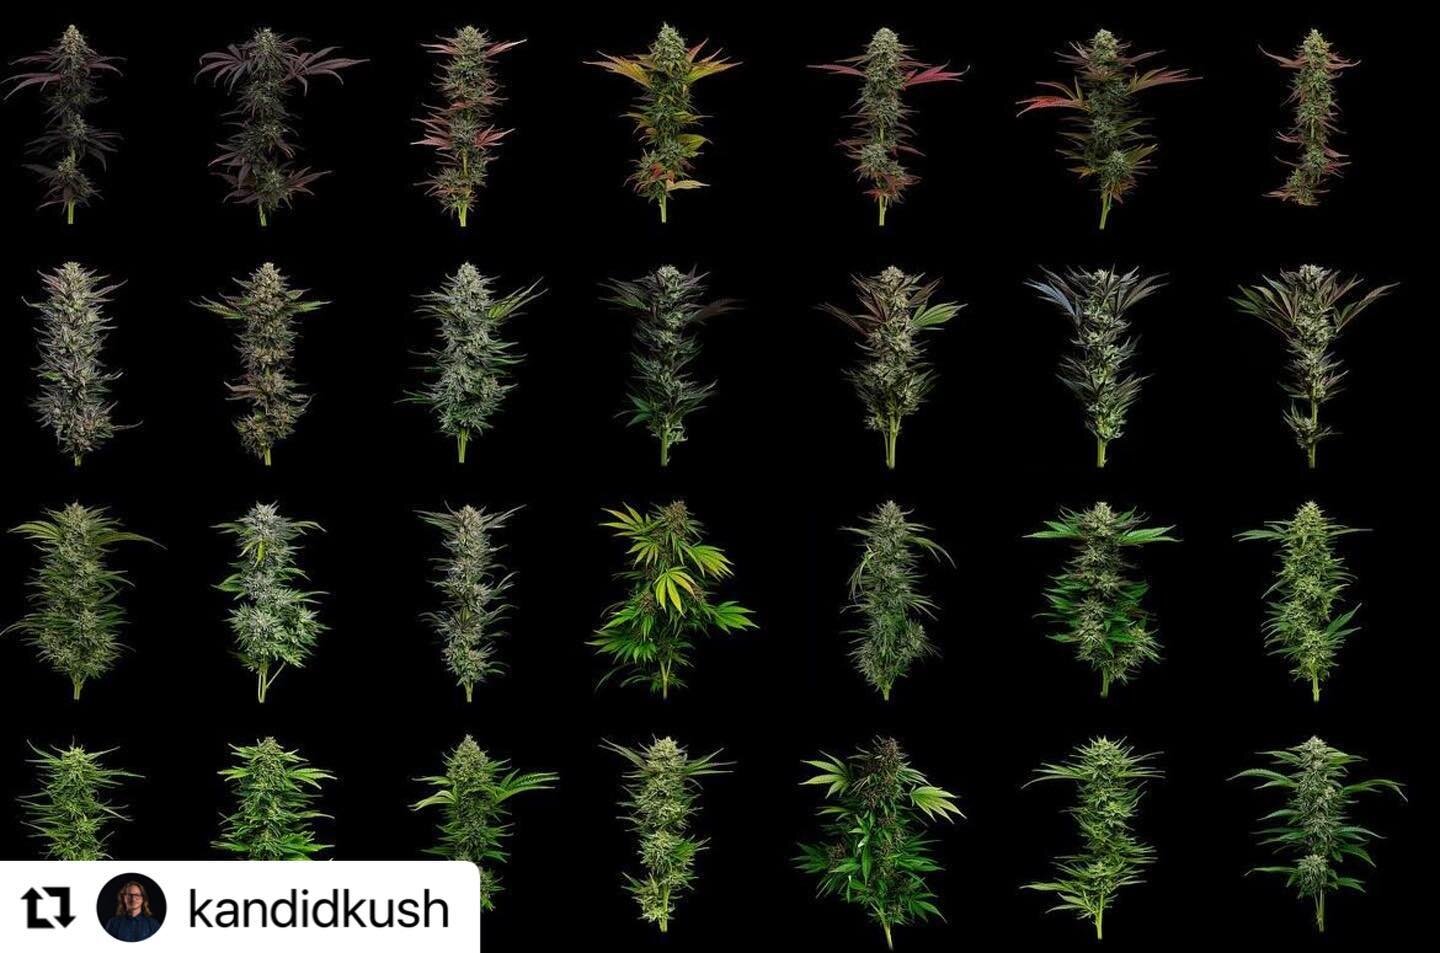 Here is a gorgeous set of editorial shots by one of the best photographers in the field @kandidkush - something enjoy during the weekend 💚 
・・・
Nestled in the back hills and redwoods of southern Mendo you&rsquo;ll find Higher Heights. 

Nate&rsquo;s